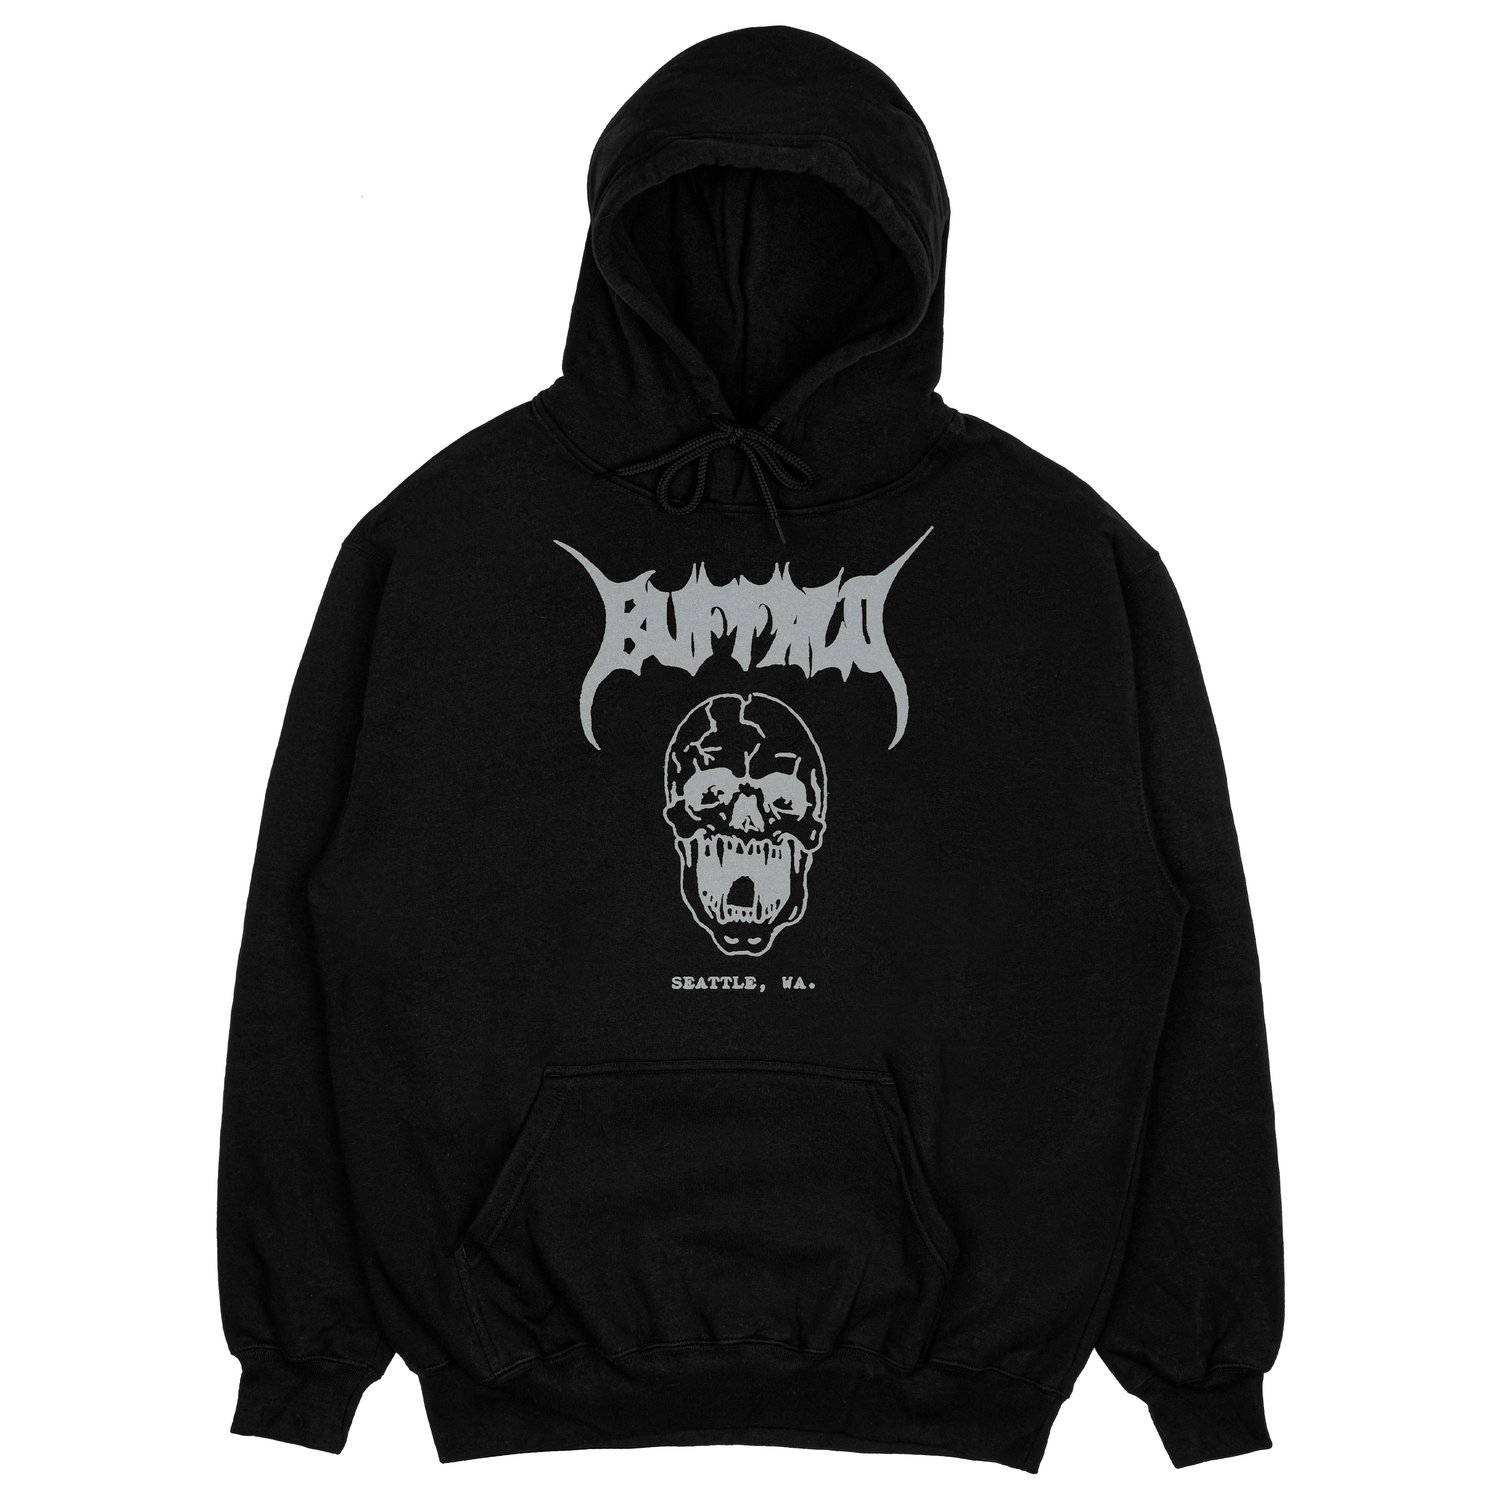 "THE VOID" GRAY AND BLACK HOODIE